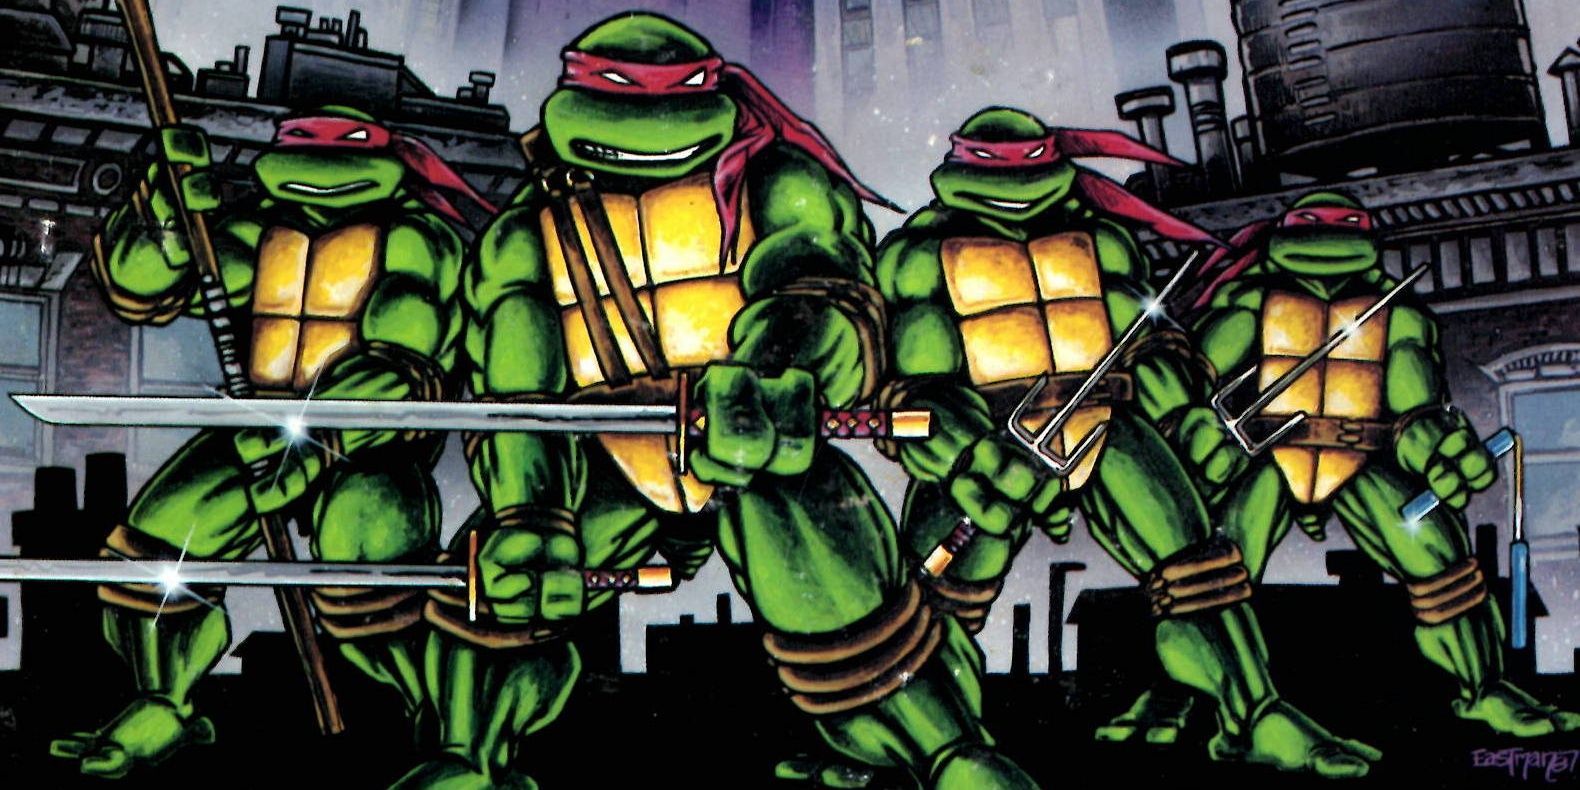 Leonardo, Michelangelo, Donatello and Raphael as they appear in the comics